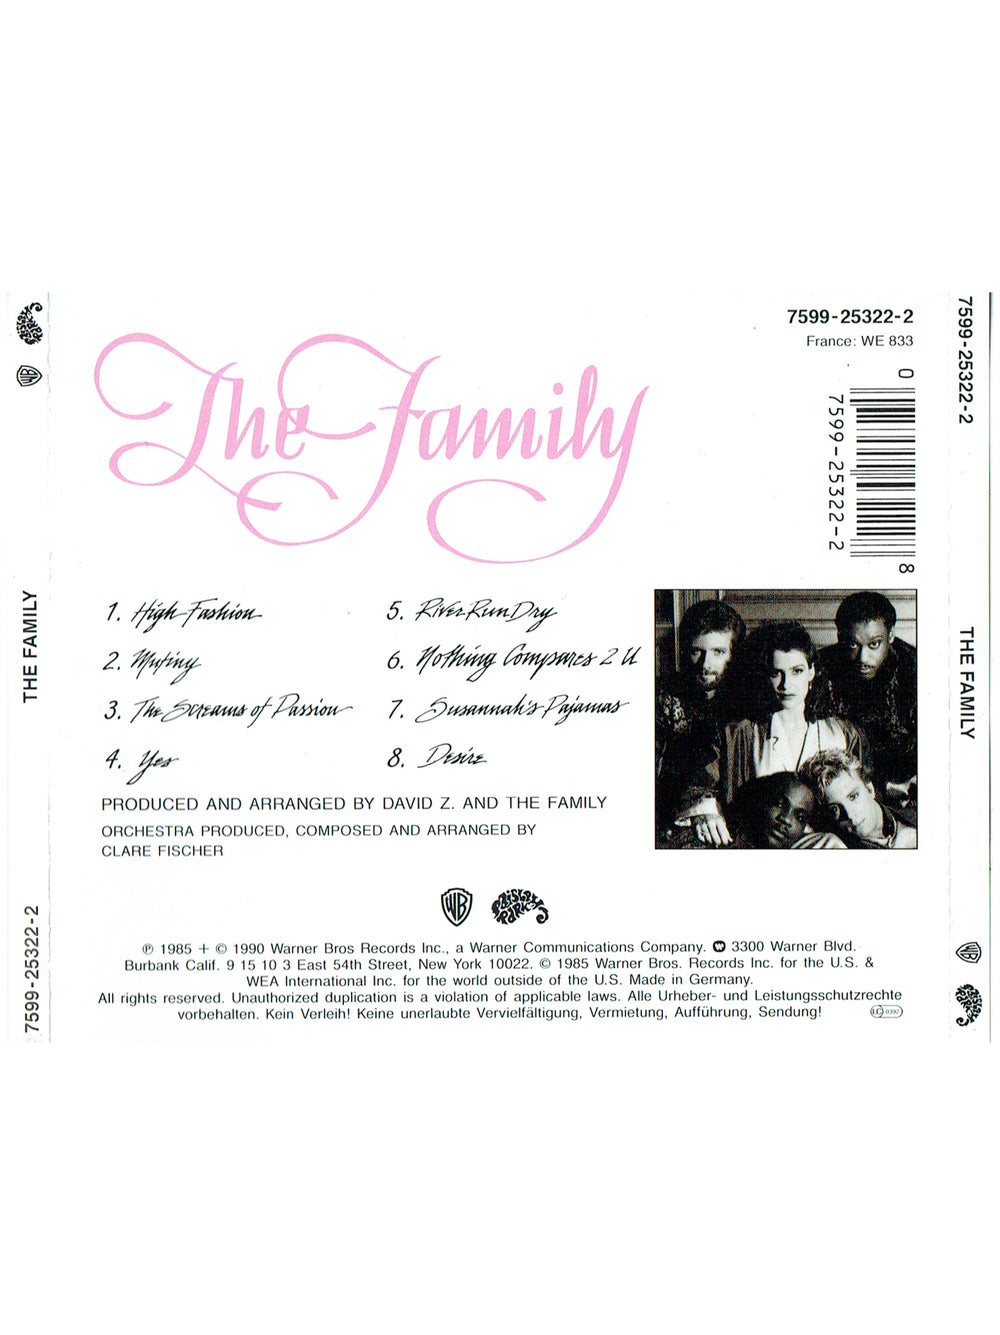 The Family Self Titled Compact Disc Album France WE 833 Release 8 Tracks Prince